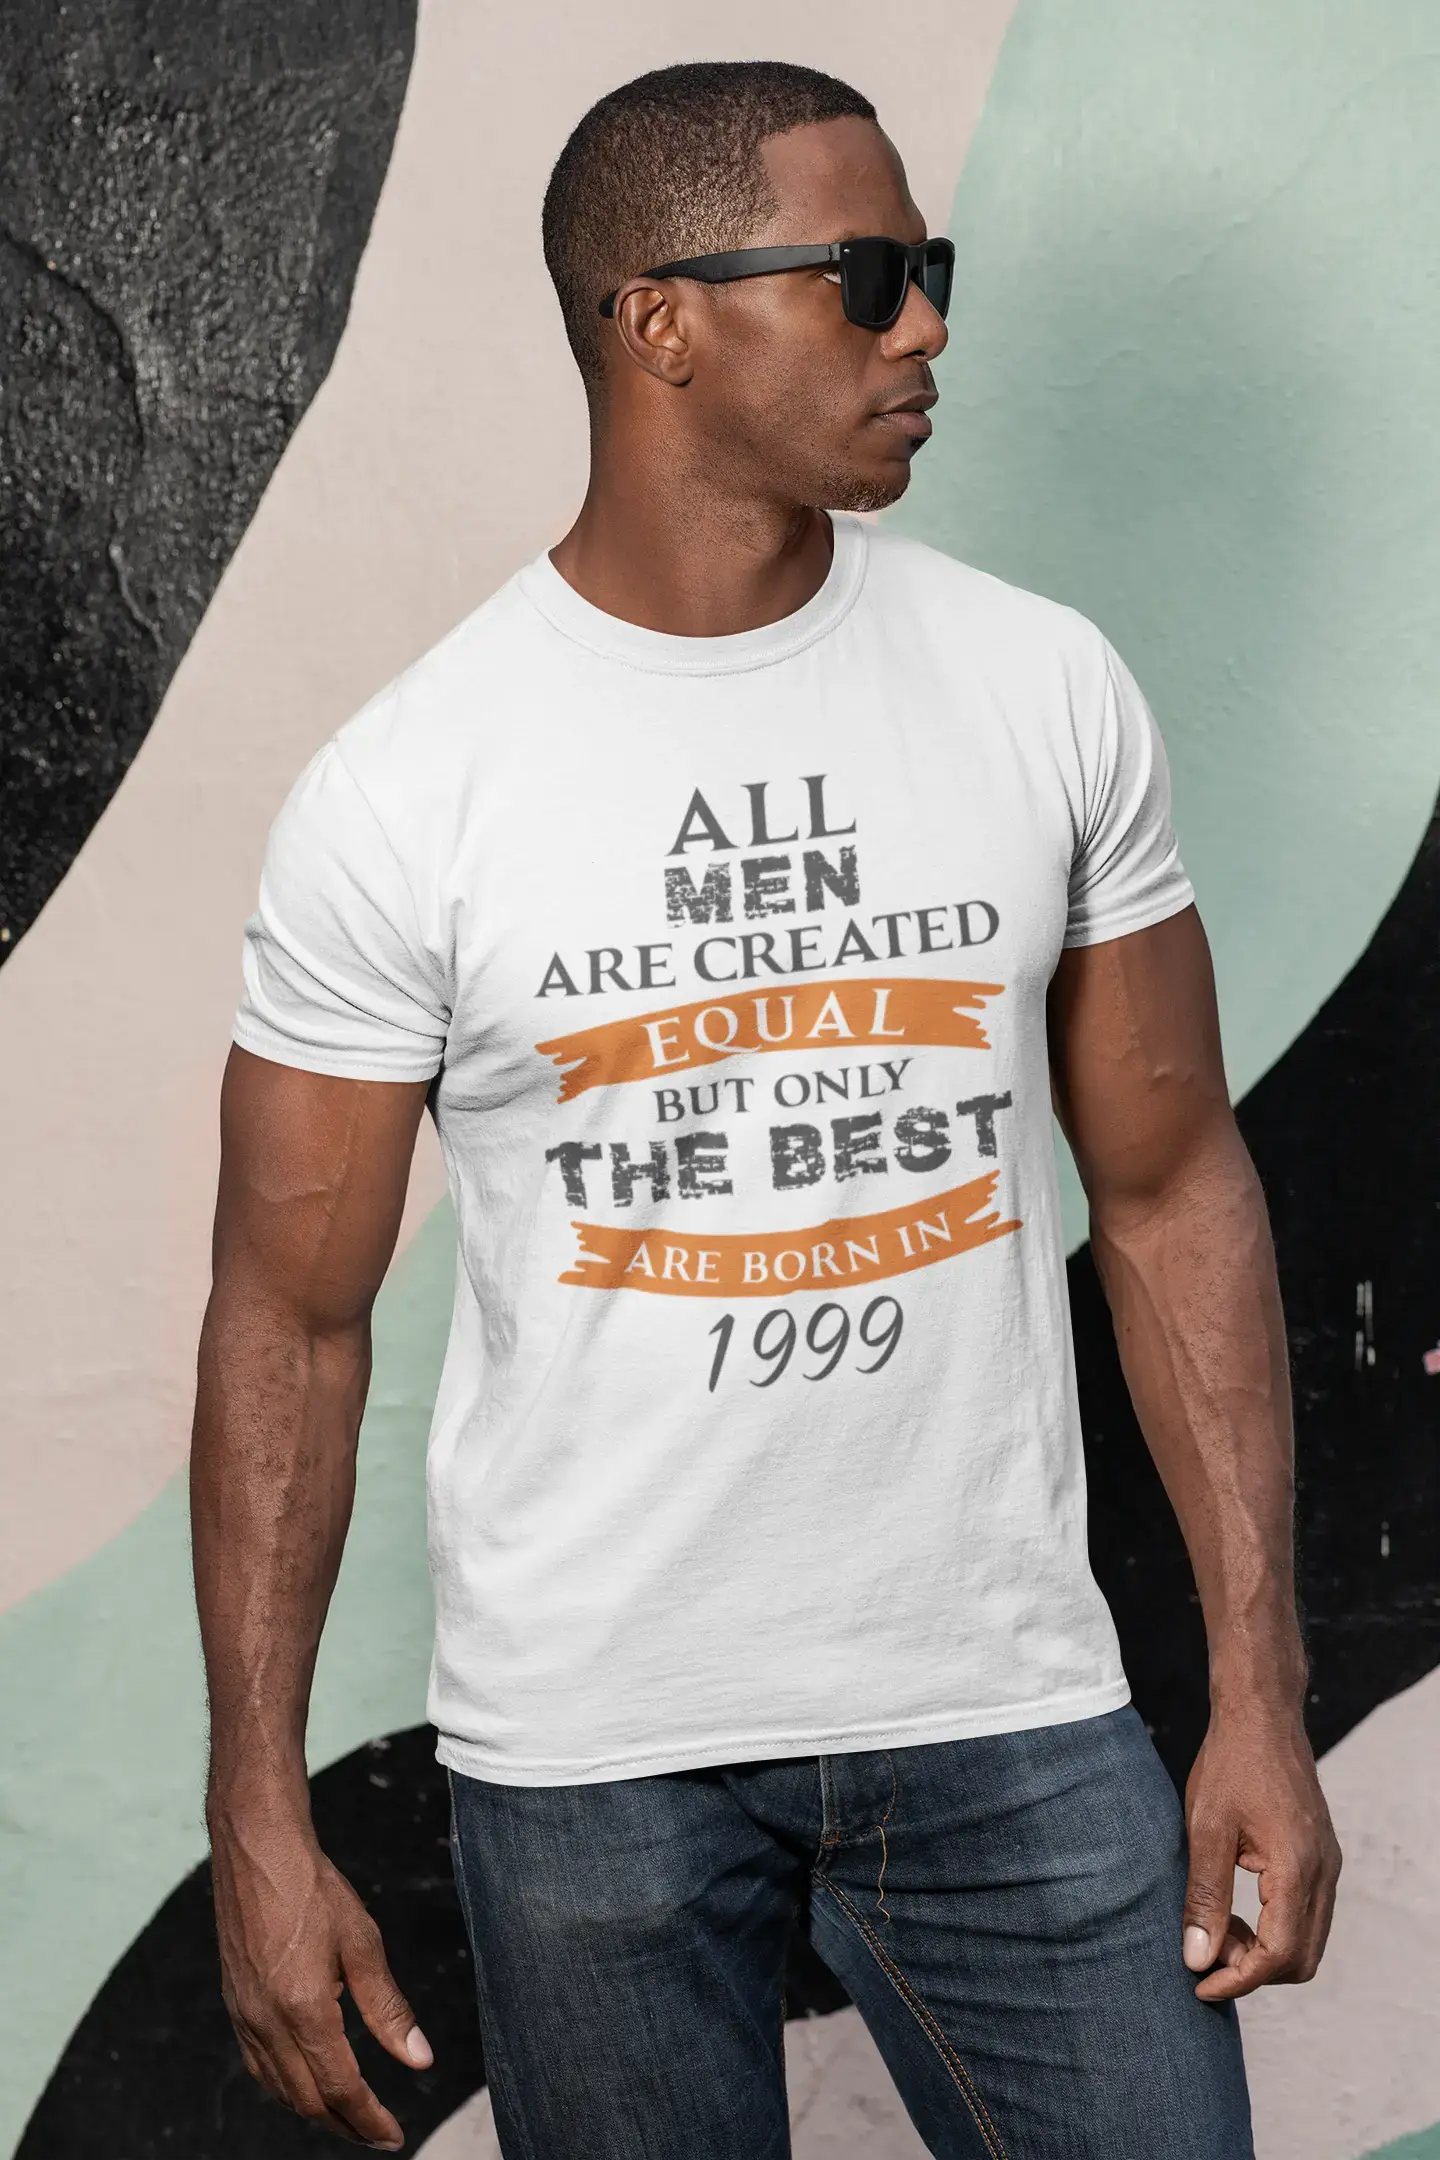 Homme Tee Vintage T Shirt 1999, Only The Best are Born in 1999